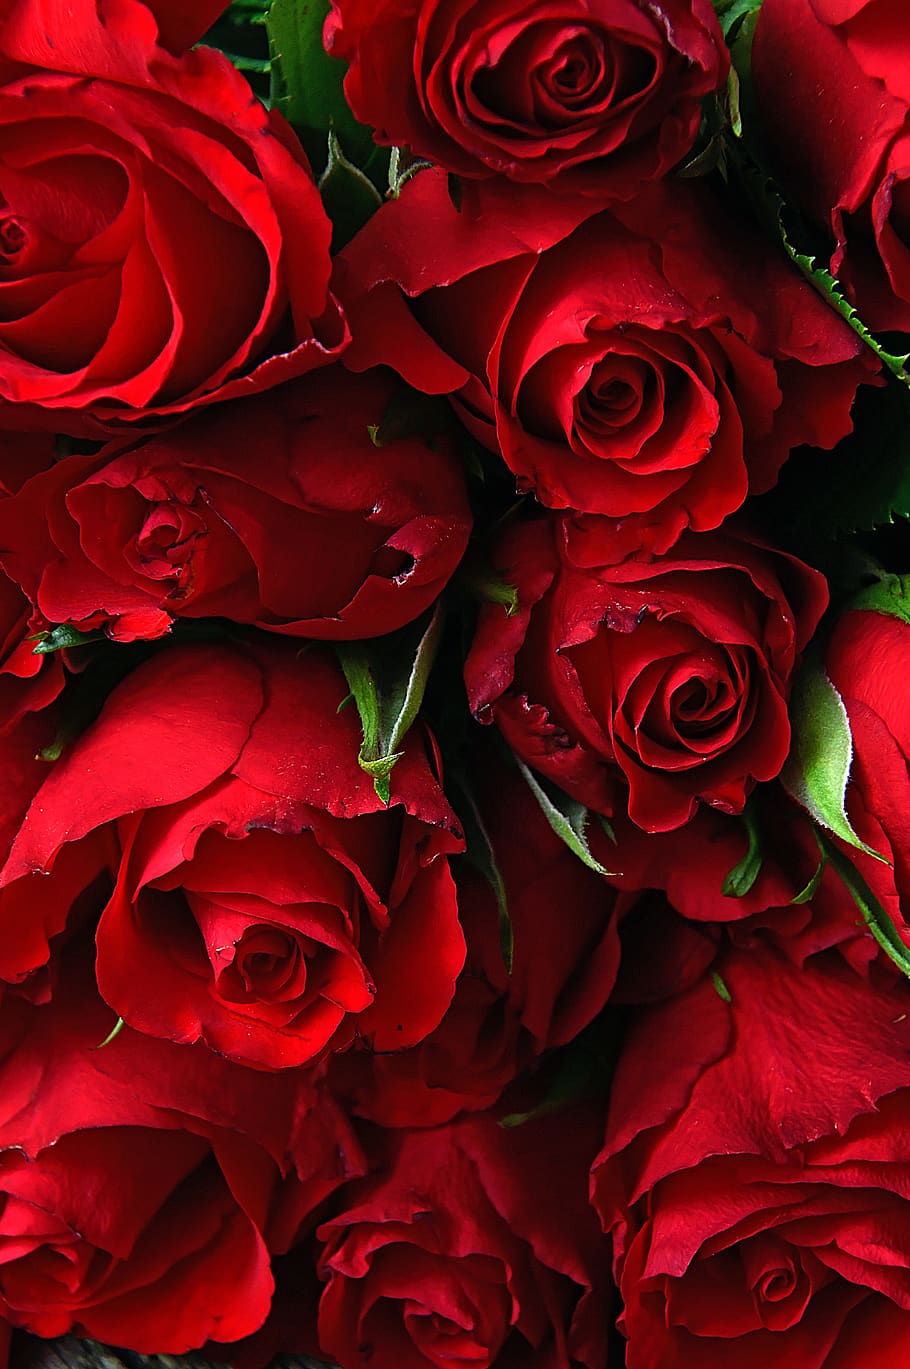 A Beautiful Red Rose Wallpapers Download  Full Screen Rose Wallpaper Hd   2560x1600 Wallpaper  teahubio